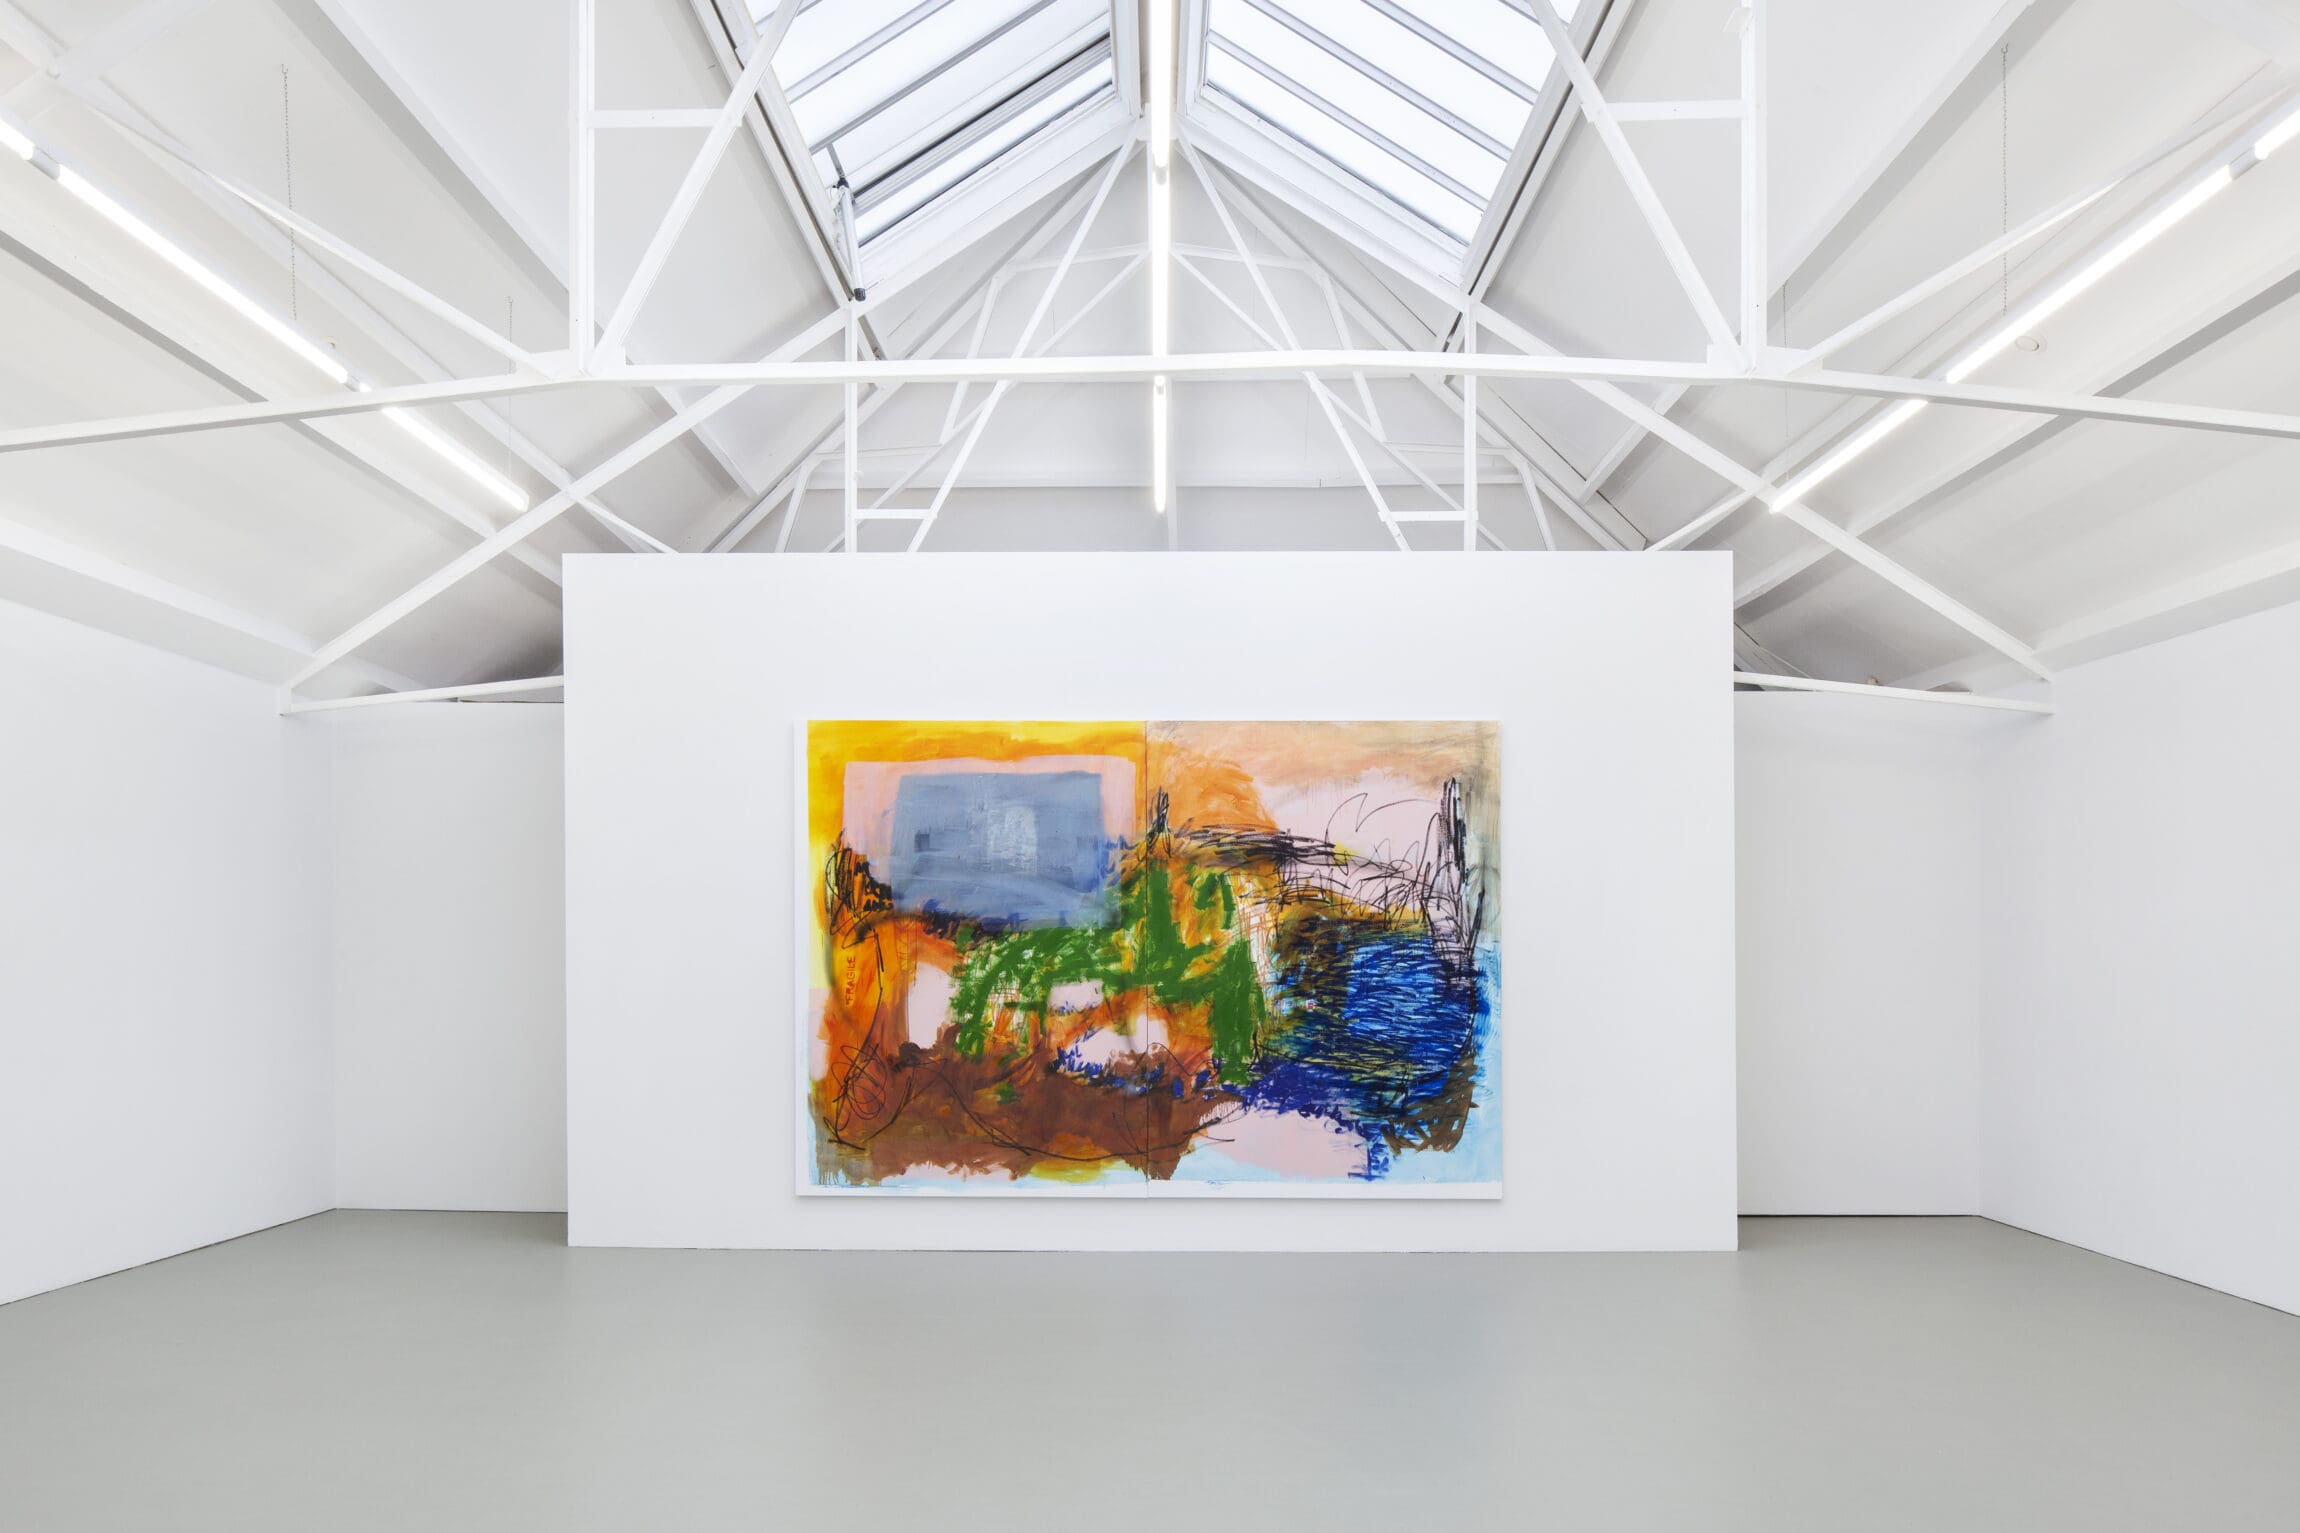 The best museums and art galleries in Amsterdam | Large colourful artwork against a white walled gallery with a soaring pitched roof